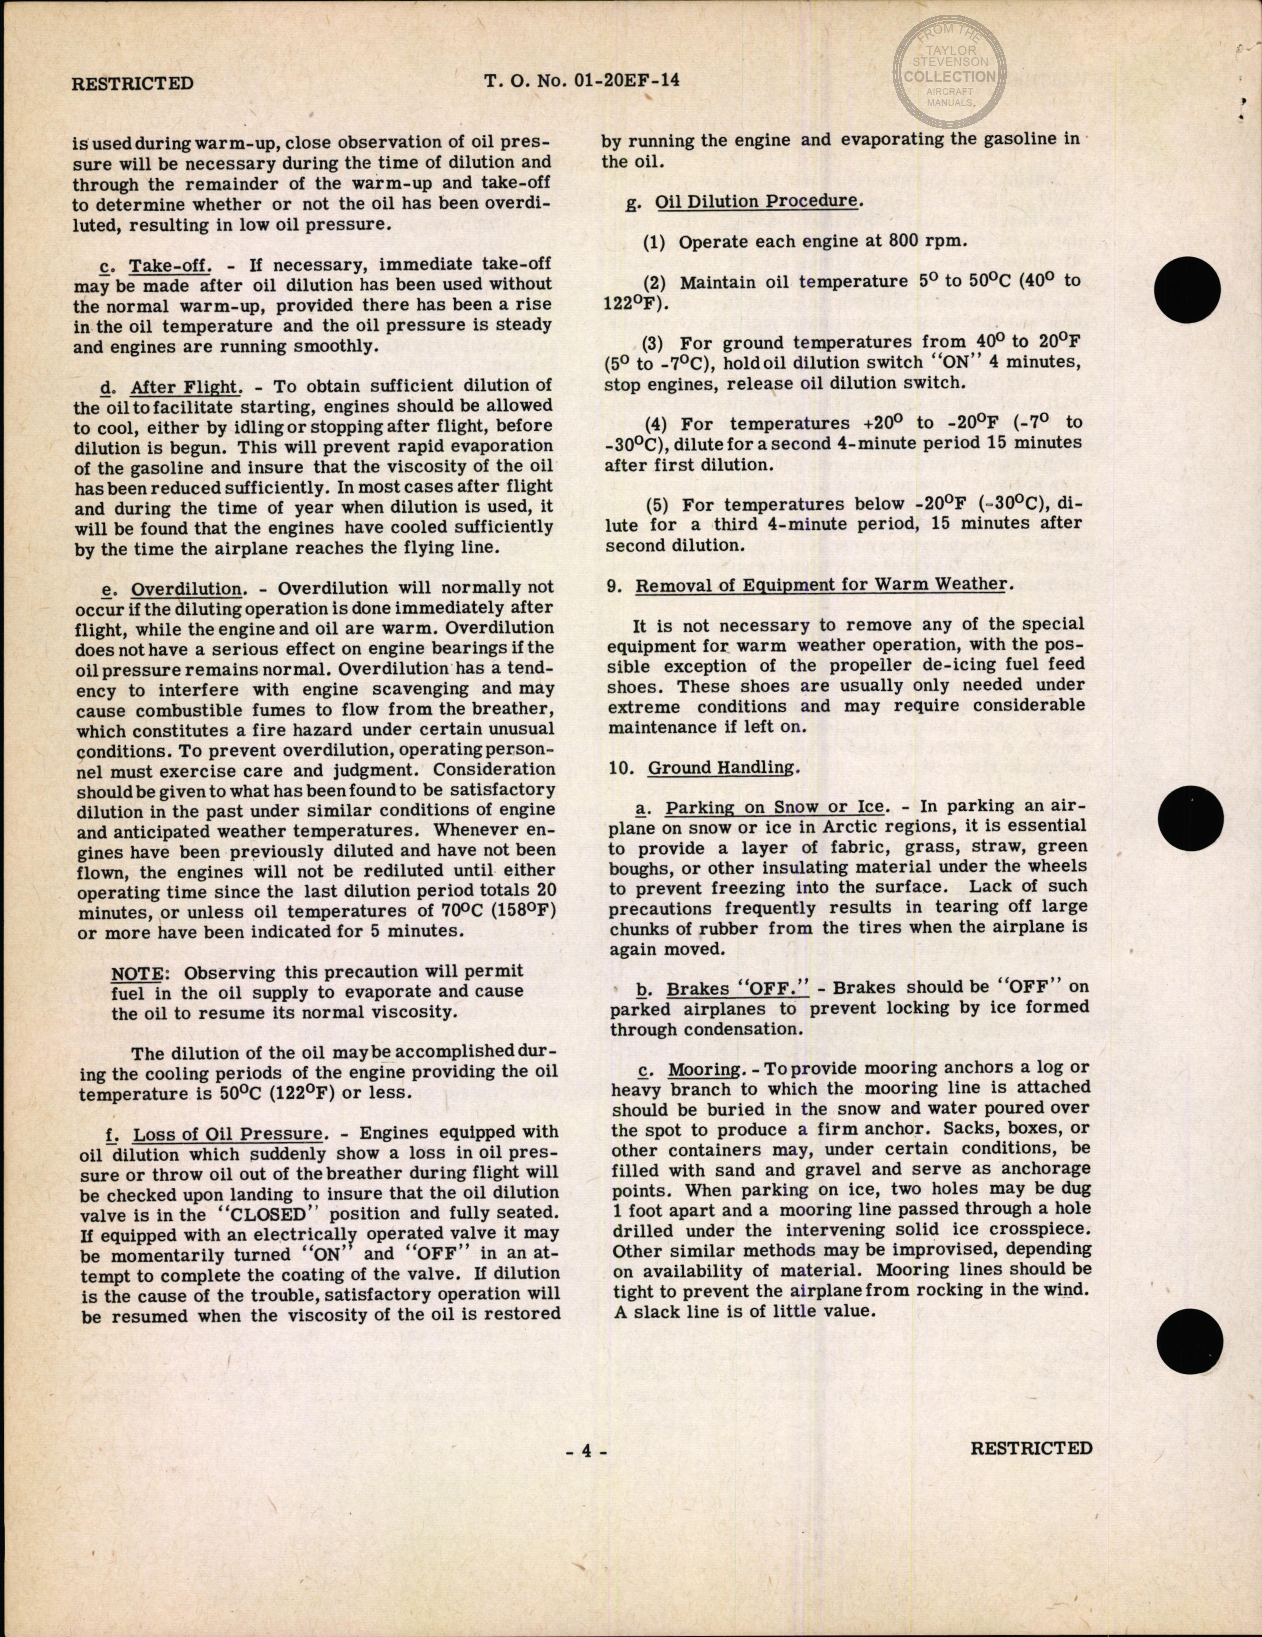 Sample page 7 from AirCorps Library document: Handbook of Cold Weather Operation for B-17F Airplane